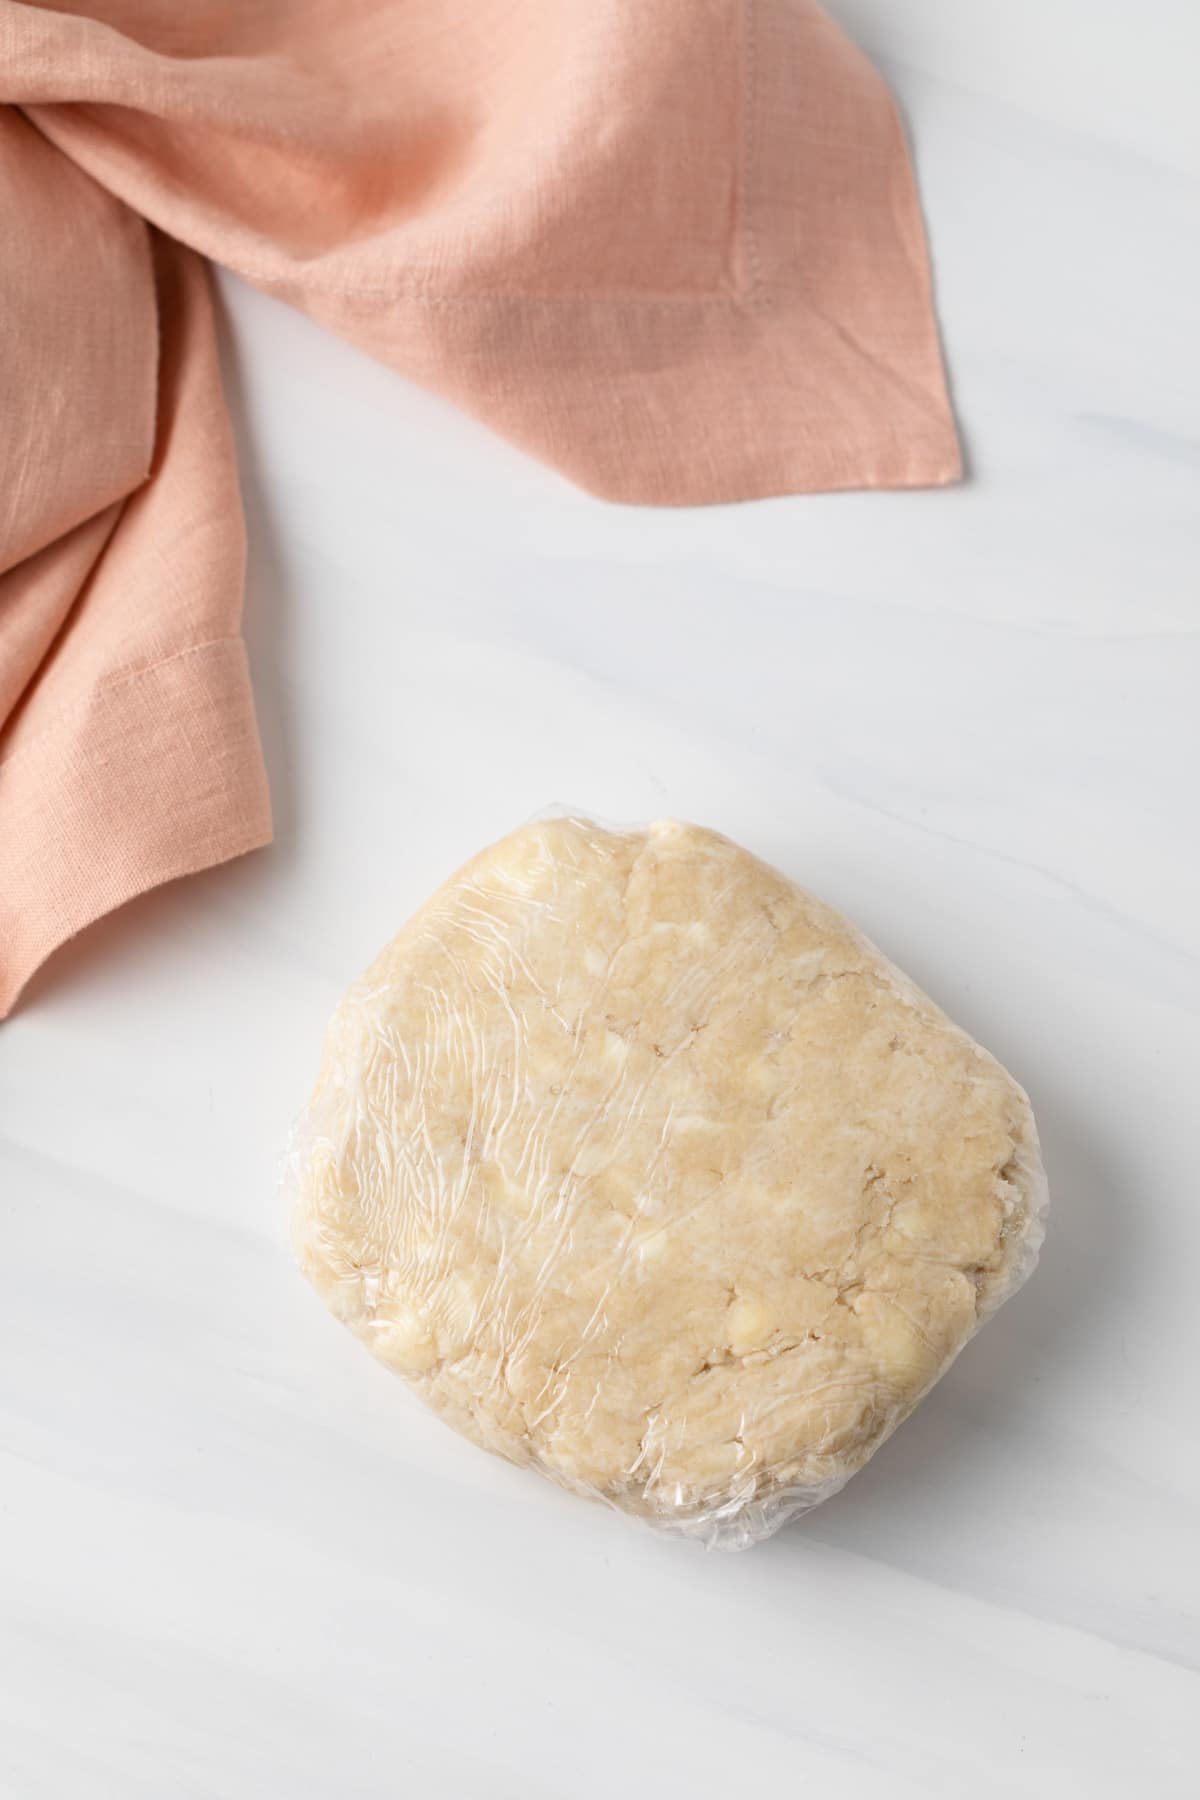 homemade pie crust dough shaped into a disk and wrapped in plastic wrap